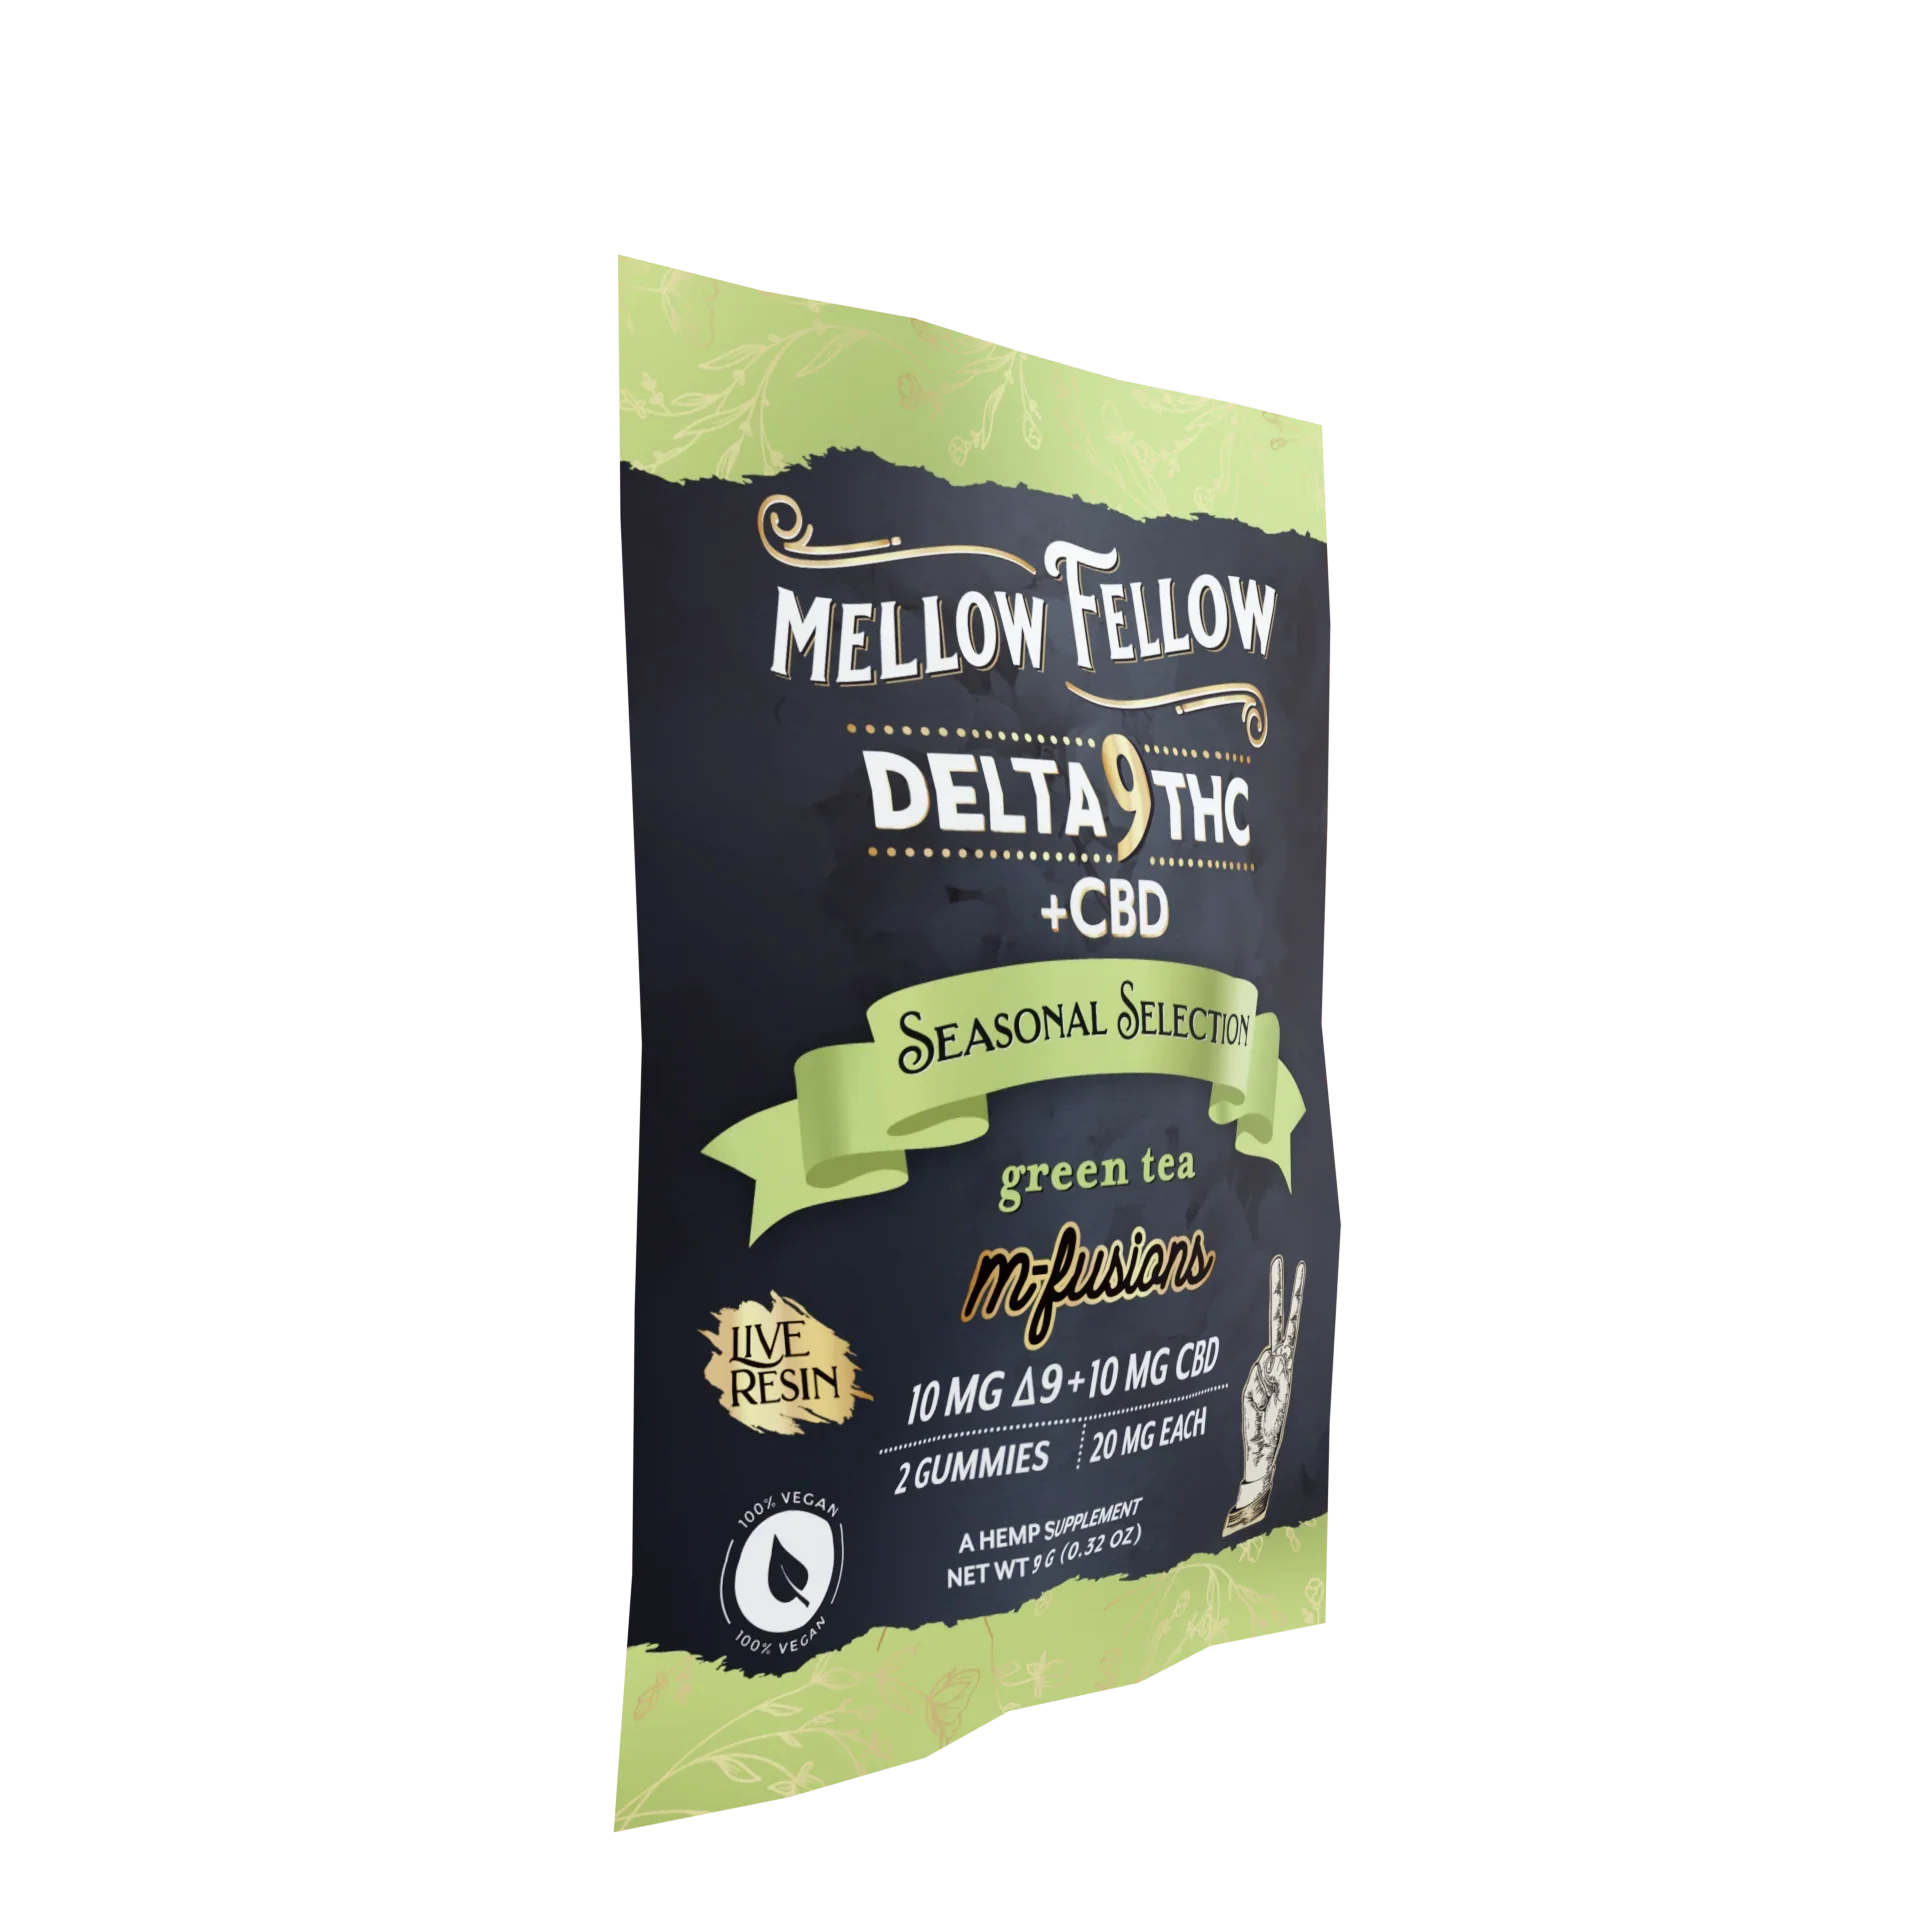 Mellow Fellow Live Resin Infused Edibles - 2cnt 40mg Delta 9 THC & CBD - Green Tea (Seasonal Selection) Best Price